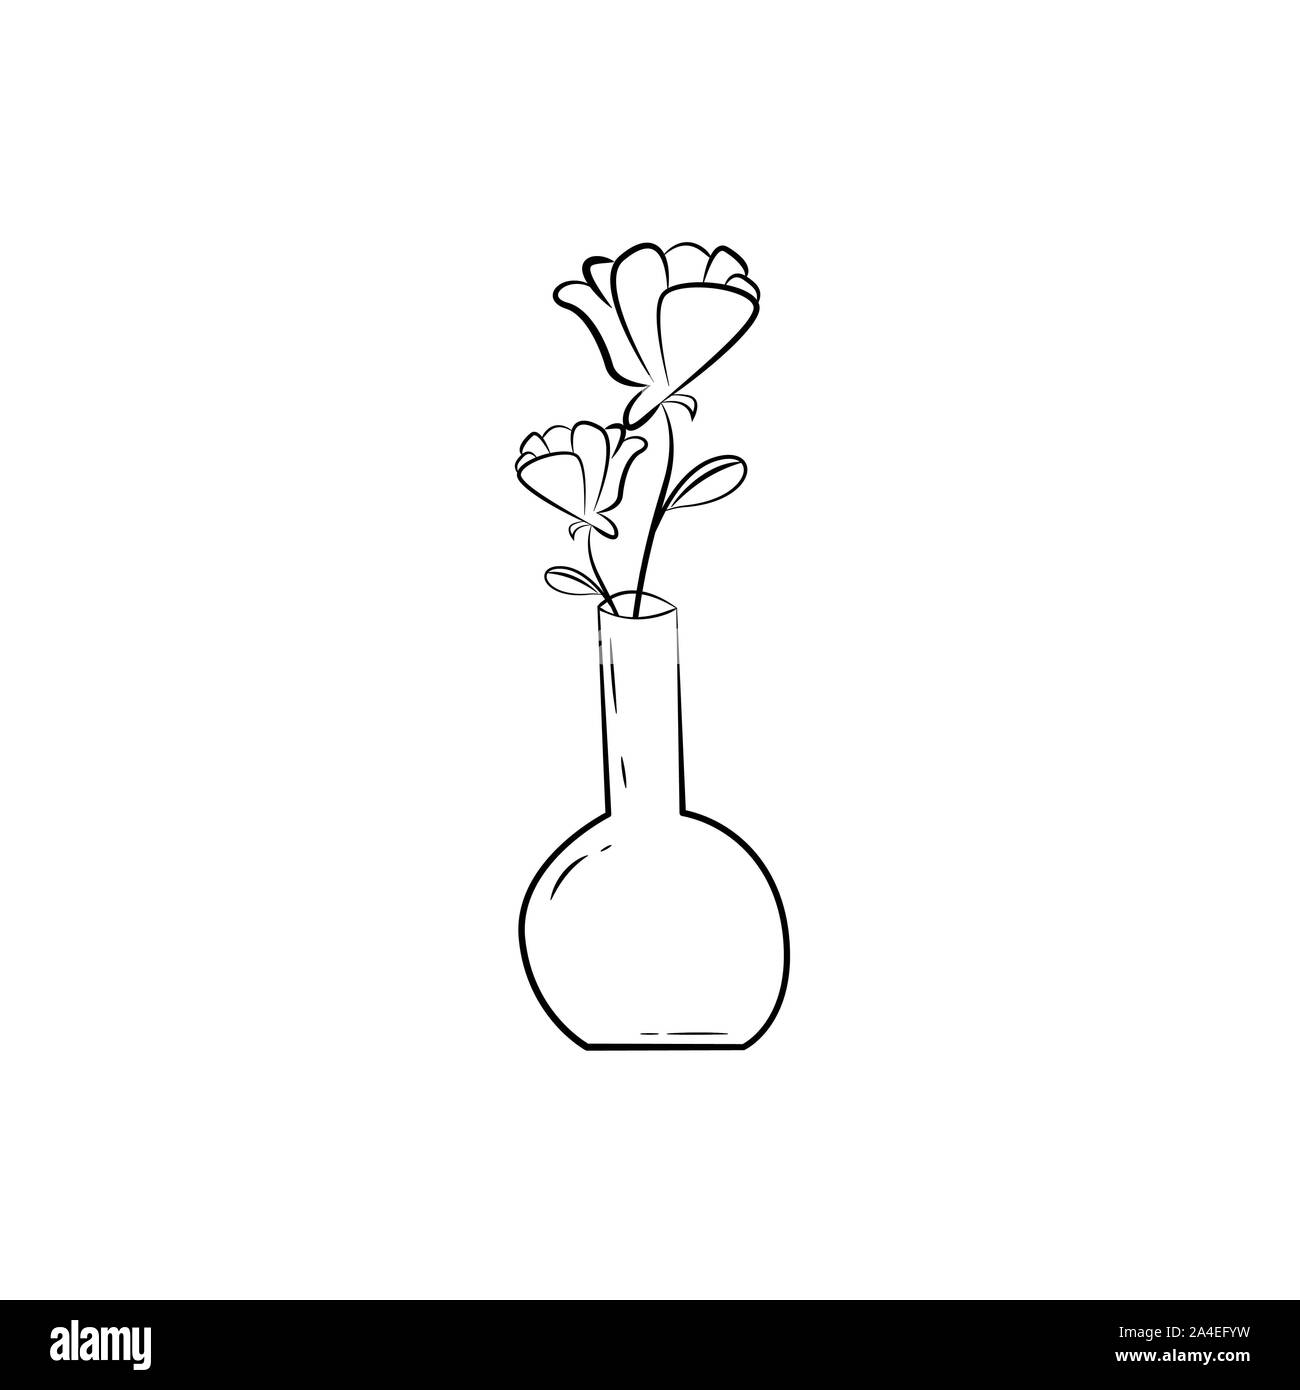 Flower in vase drawing in one continuous line. Simplistic stylized daisy Stock Photo